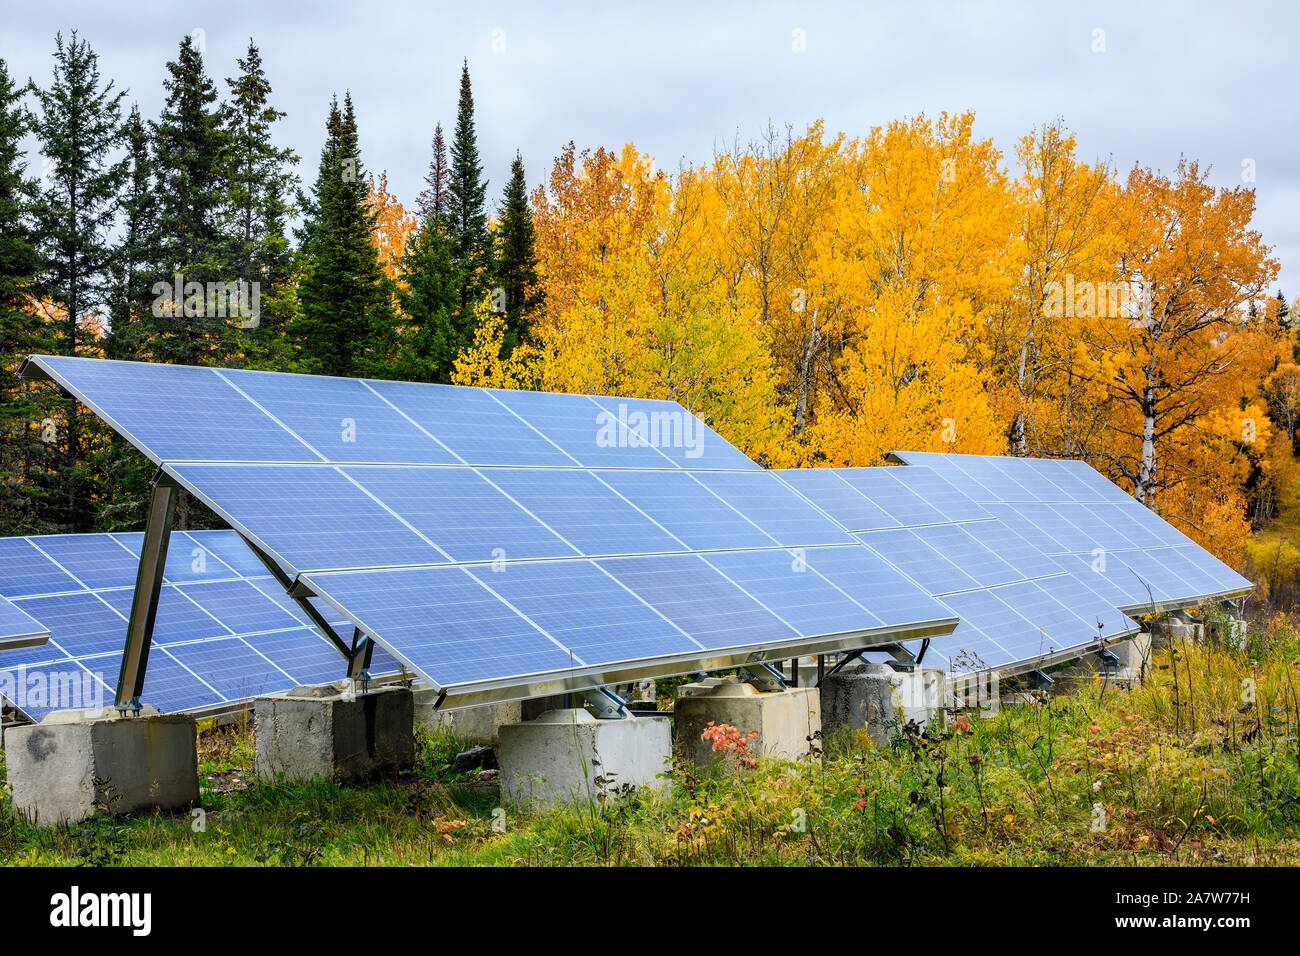 Solar energy panels in the forest, Manitoba, Canada. Stock Photo